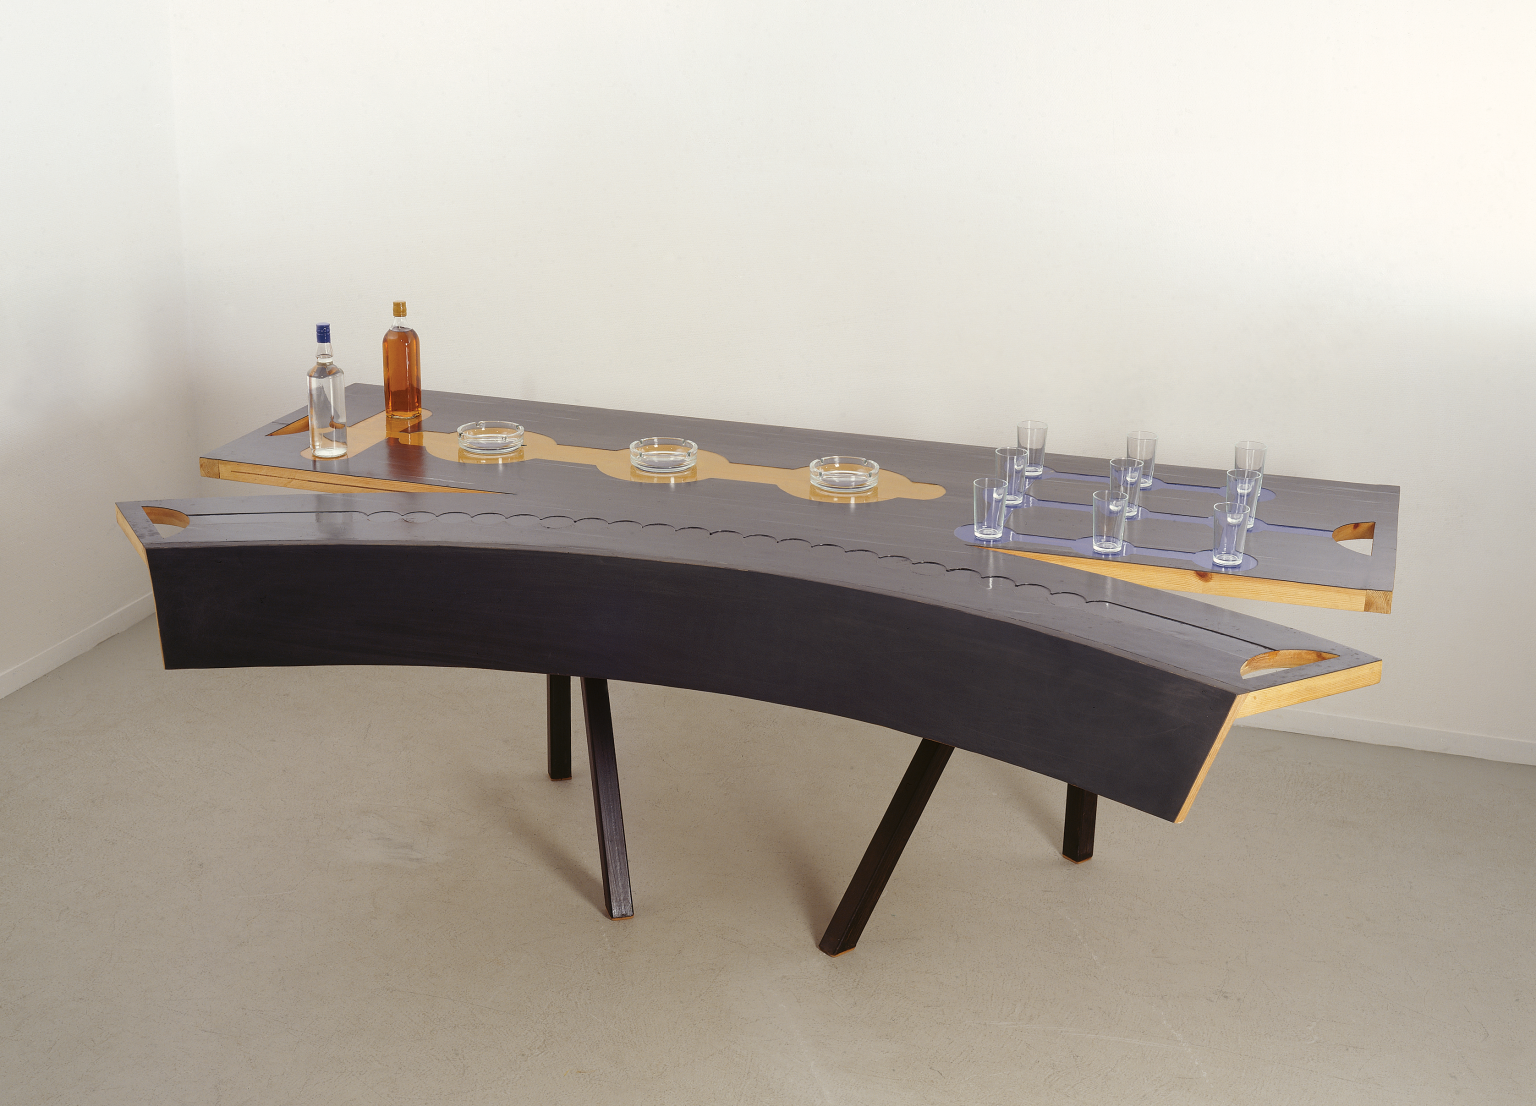 Sculpture of a cracked table with set of drinking glasses and glass ashtrays on it. 